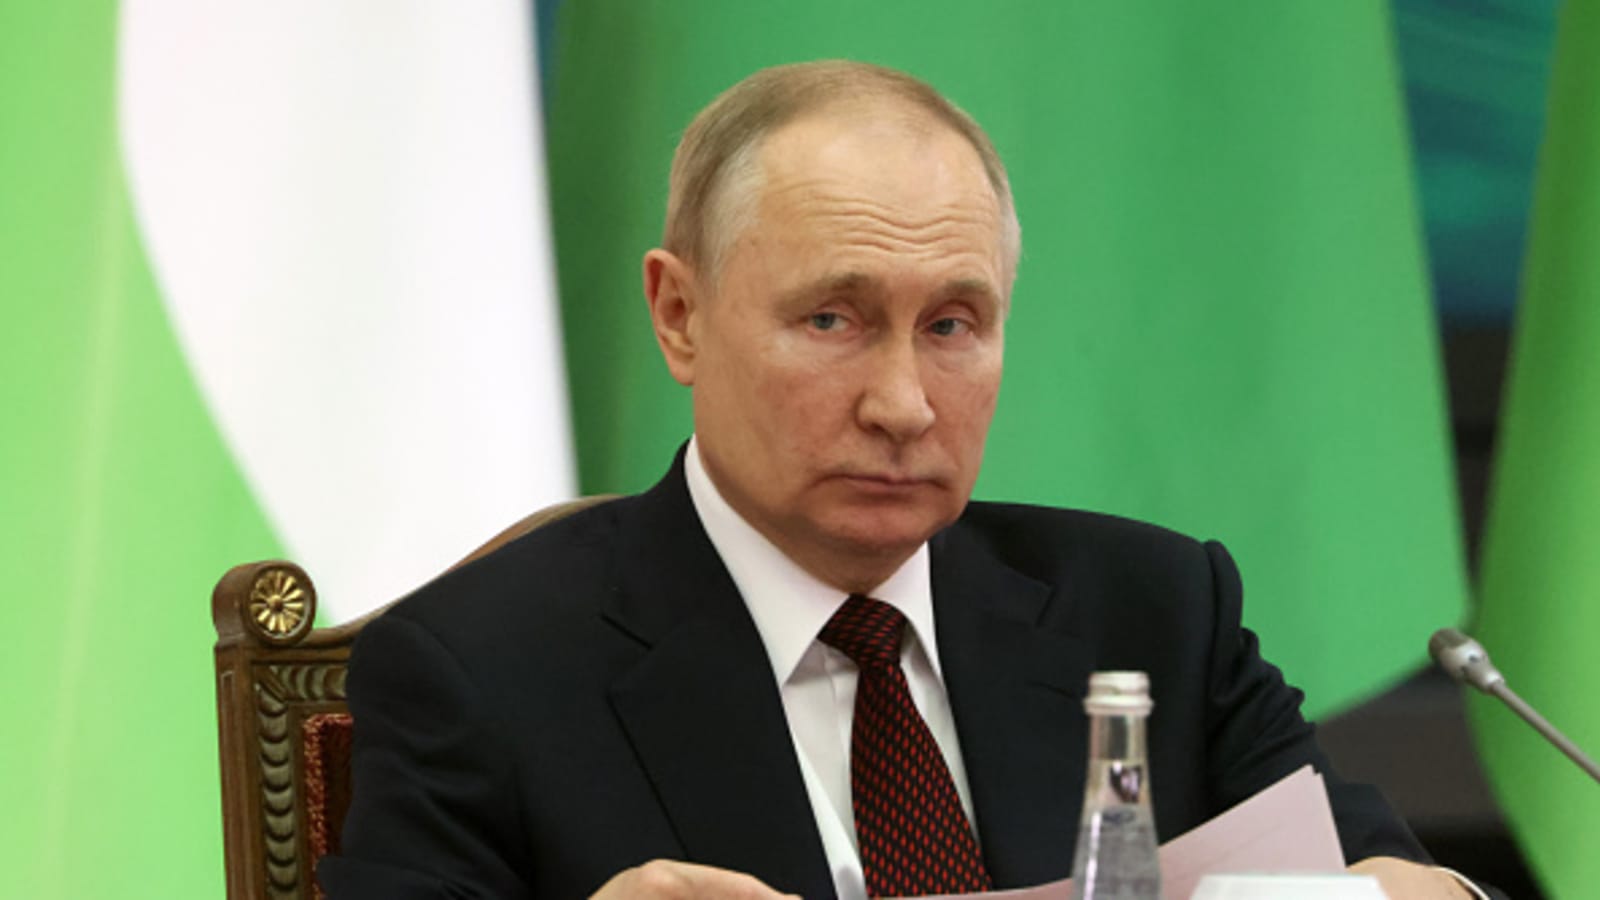 Putin attempts to undermine oil price cap as global energy markets fracture- oil and gas 360